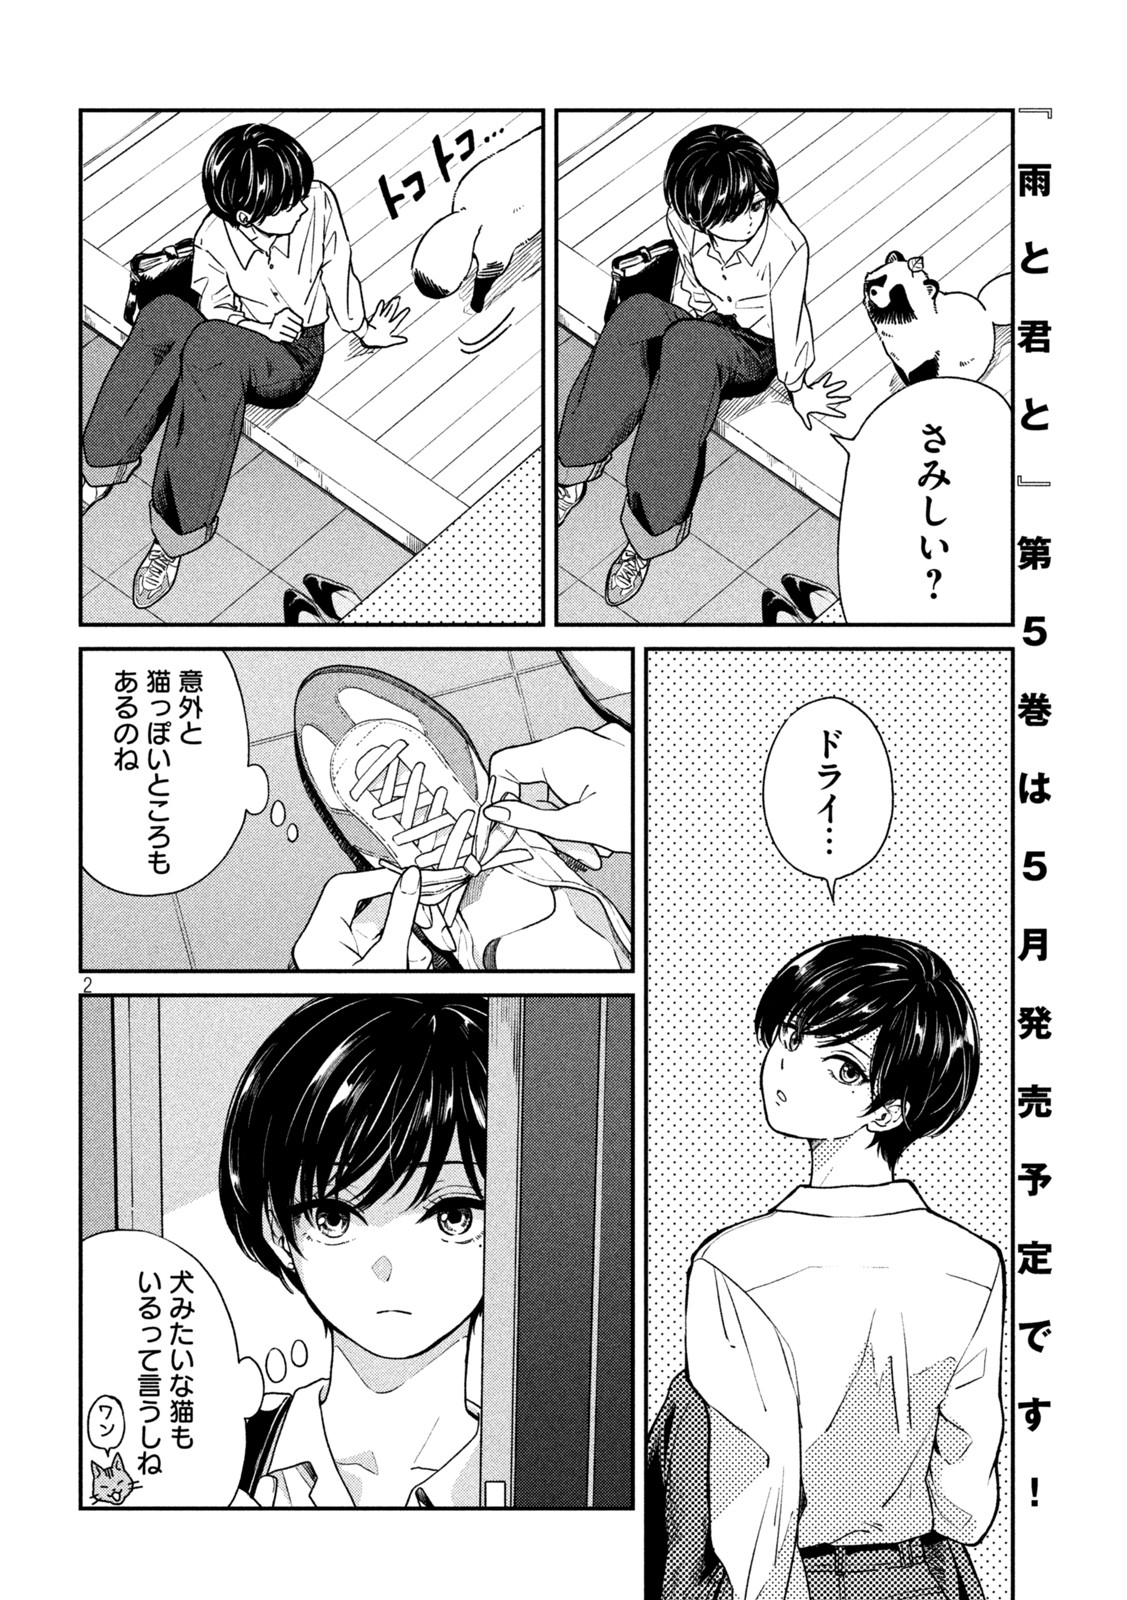 Ame to Kimi to - Chapter 87 - Page 2